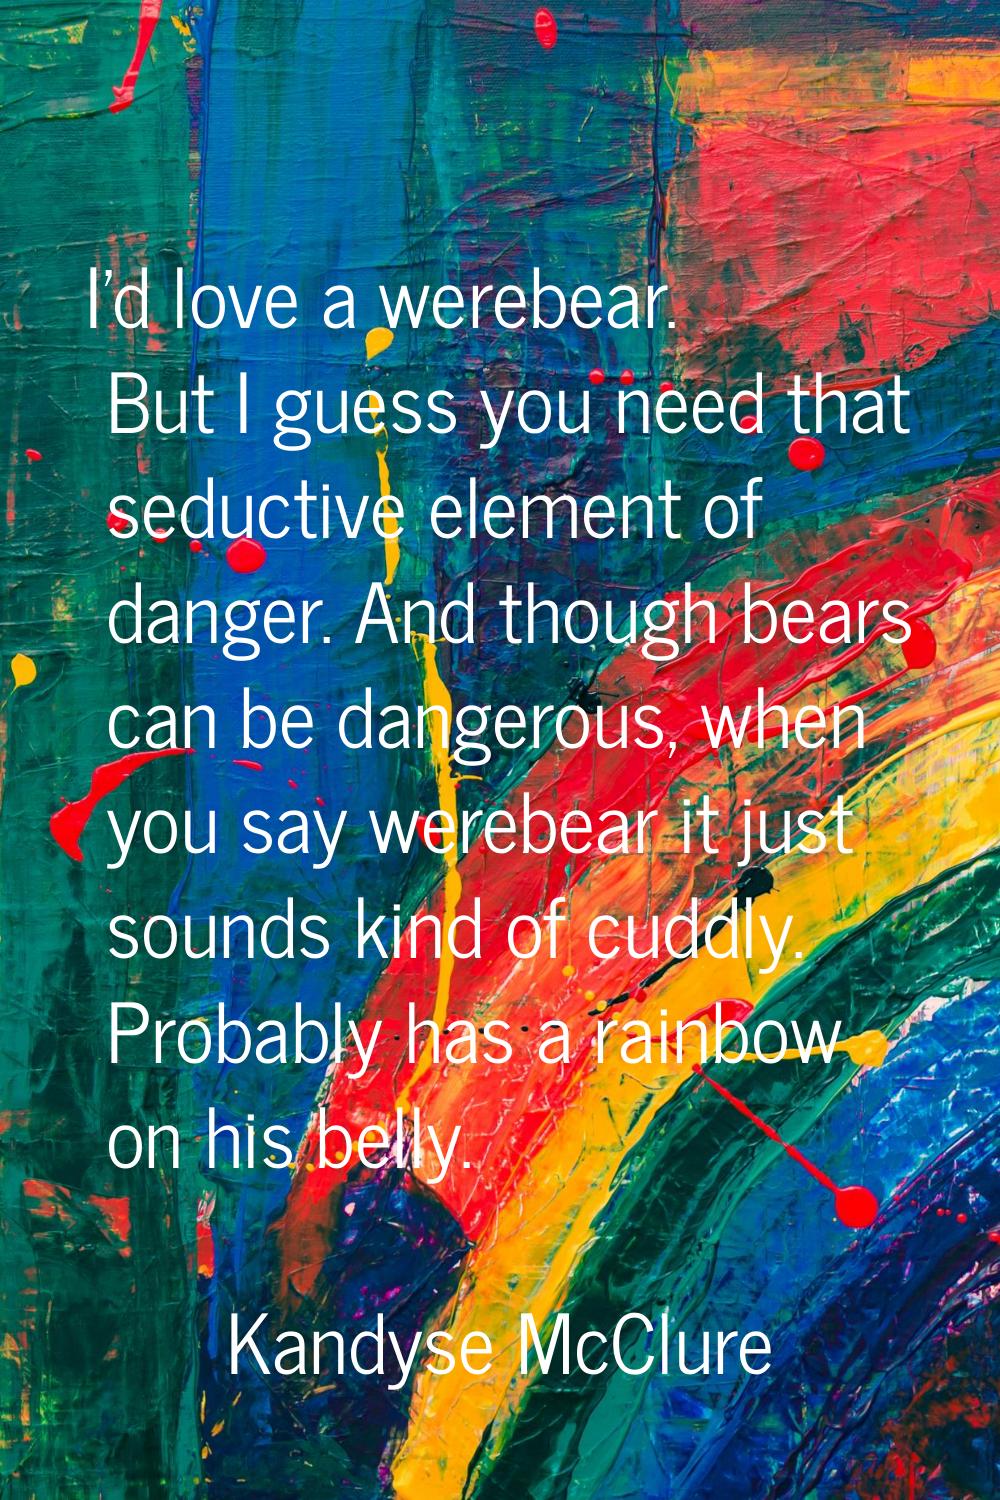 I'd love a werebear. But I guess you need that seductive element of danger. And though bears can be